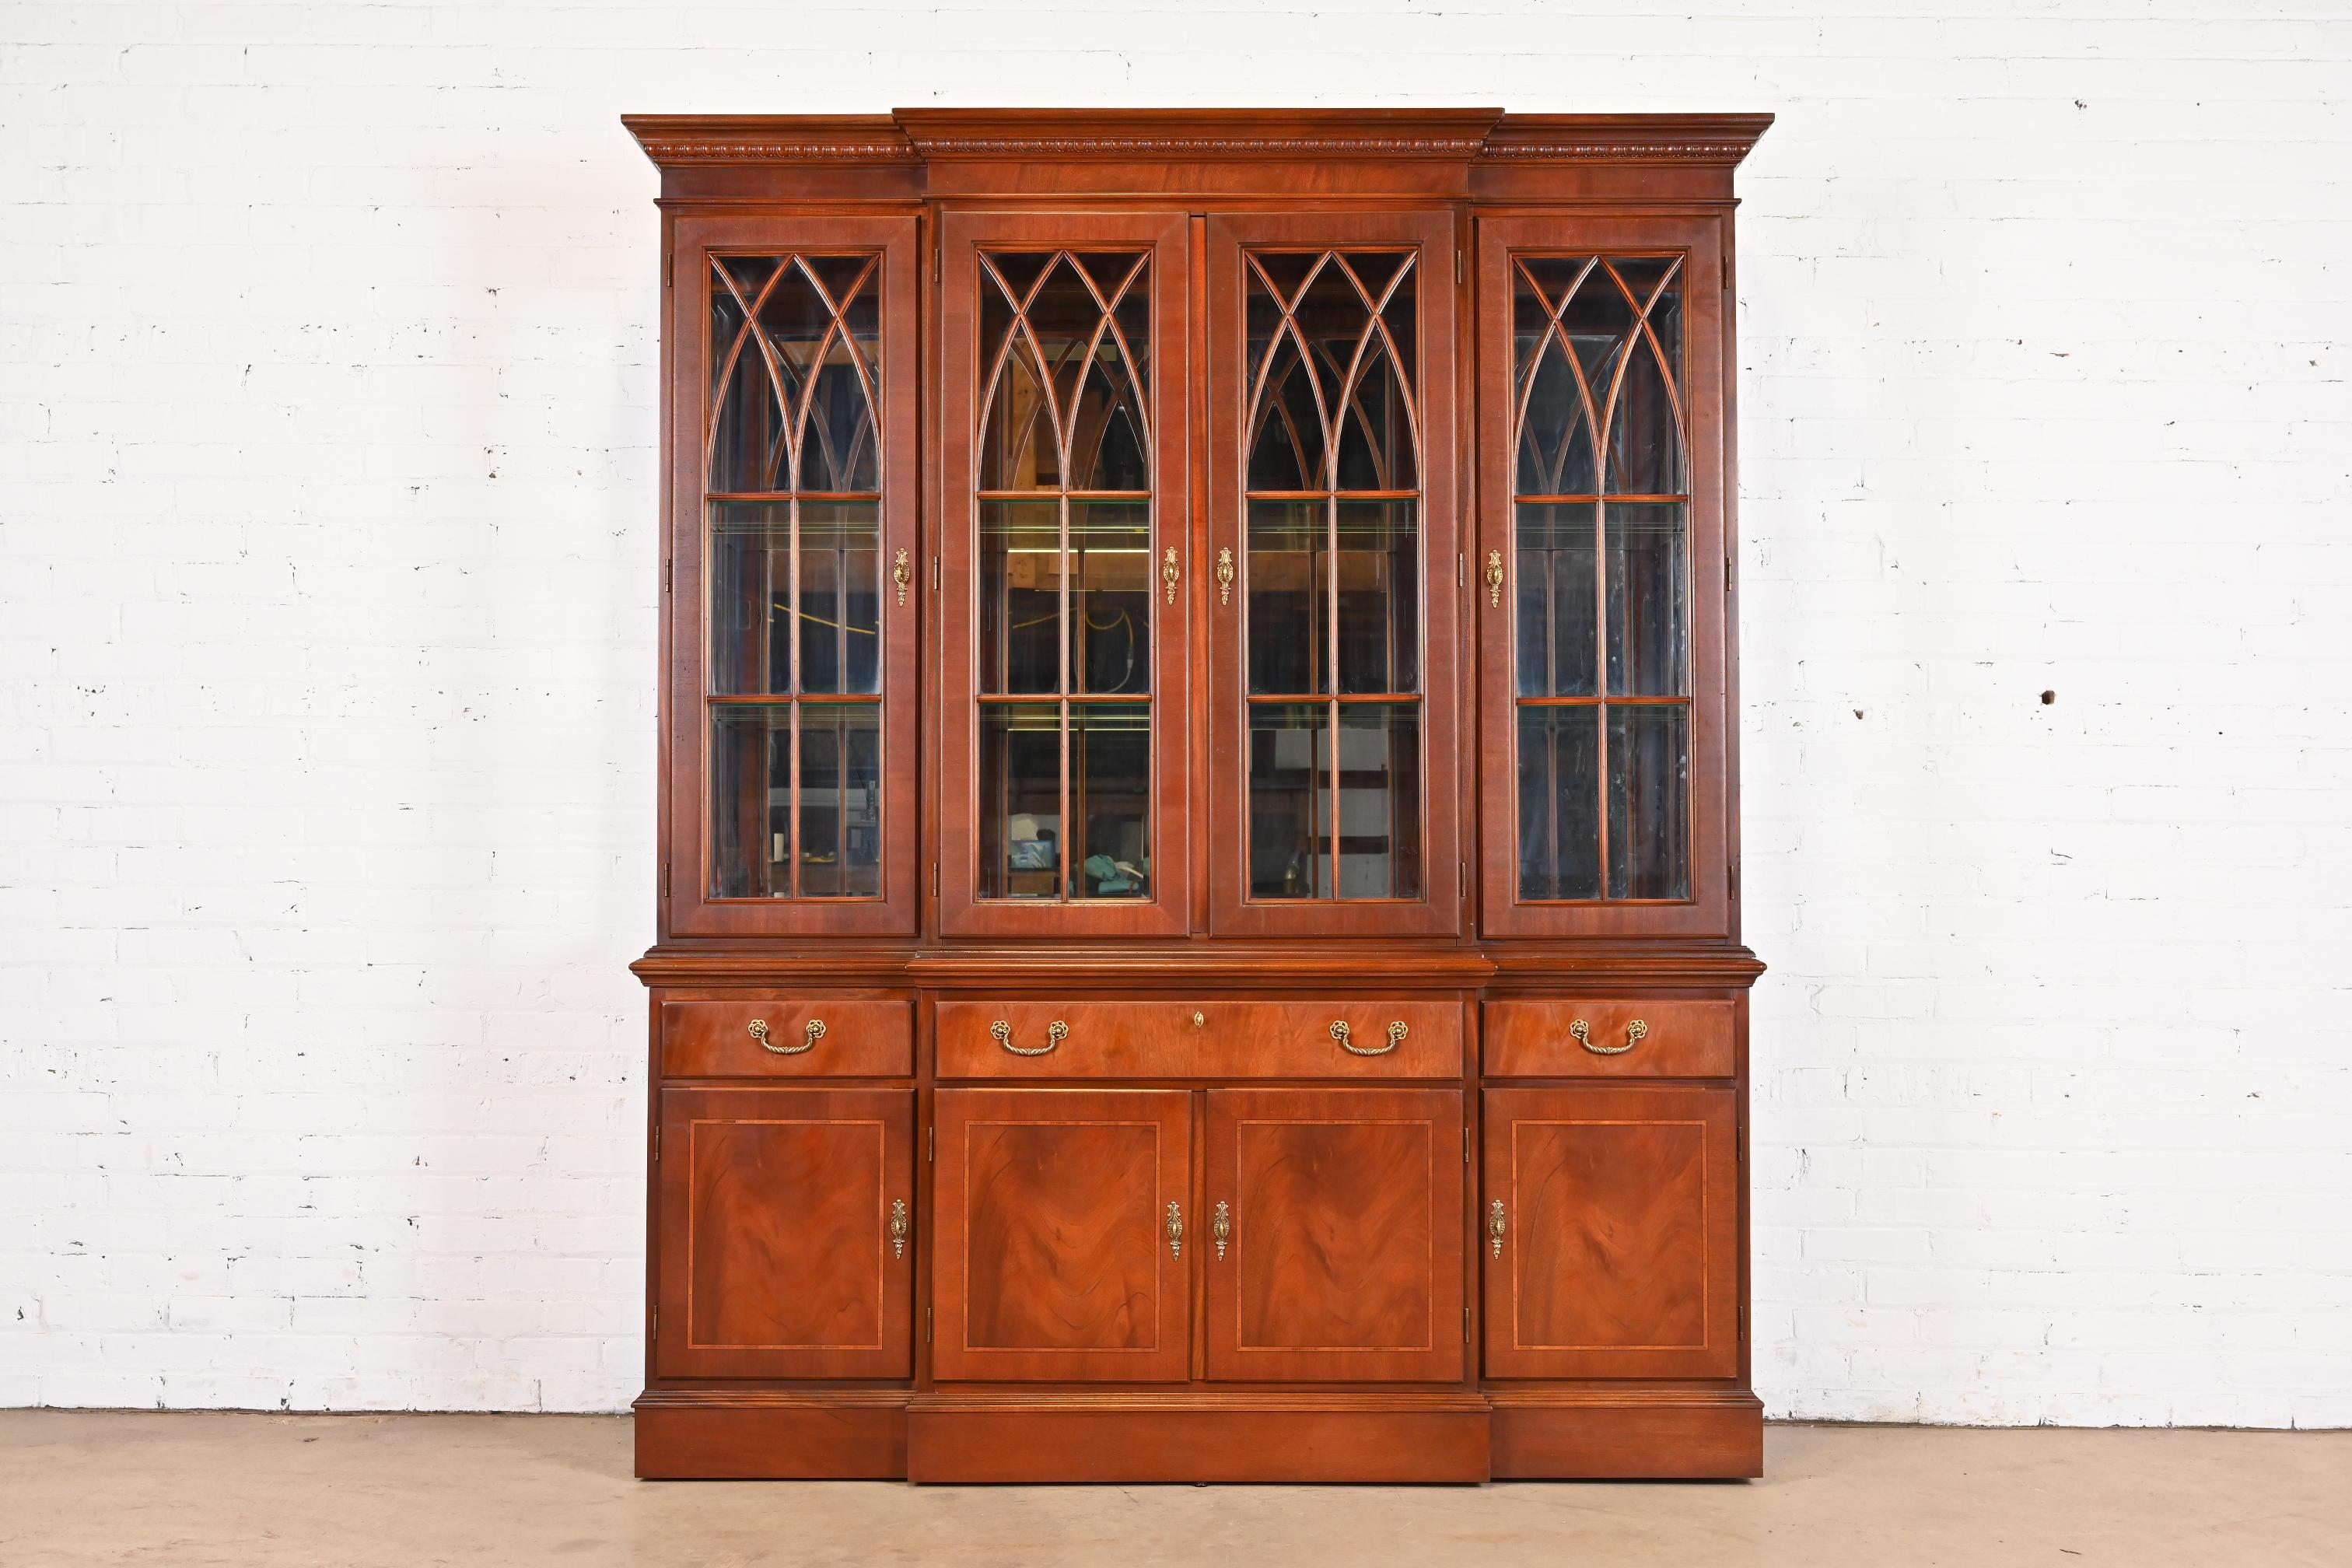 A gorgeous Georgian or Chippendale style lighted breakfront bookcase, dining cabinet, or bar cabinet

USA, Late 20th Century

Beautiful carved mahogany, with satinwood inlay, mullioned glass front doors, mirrored glass backing, and original brass